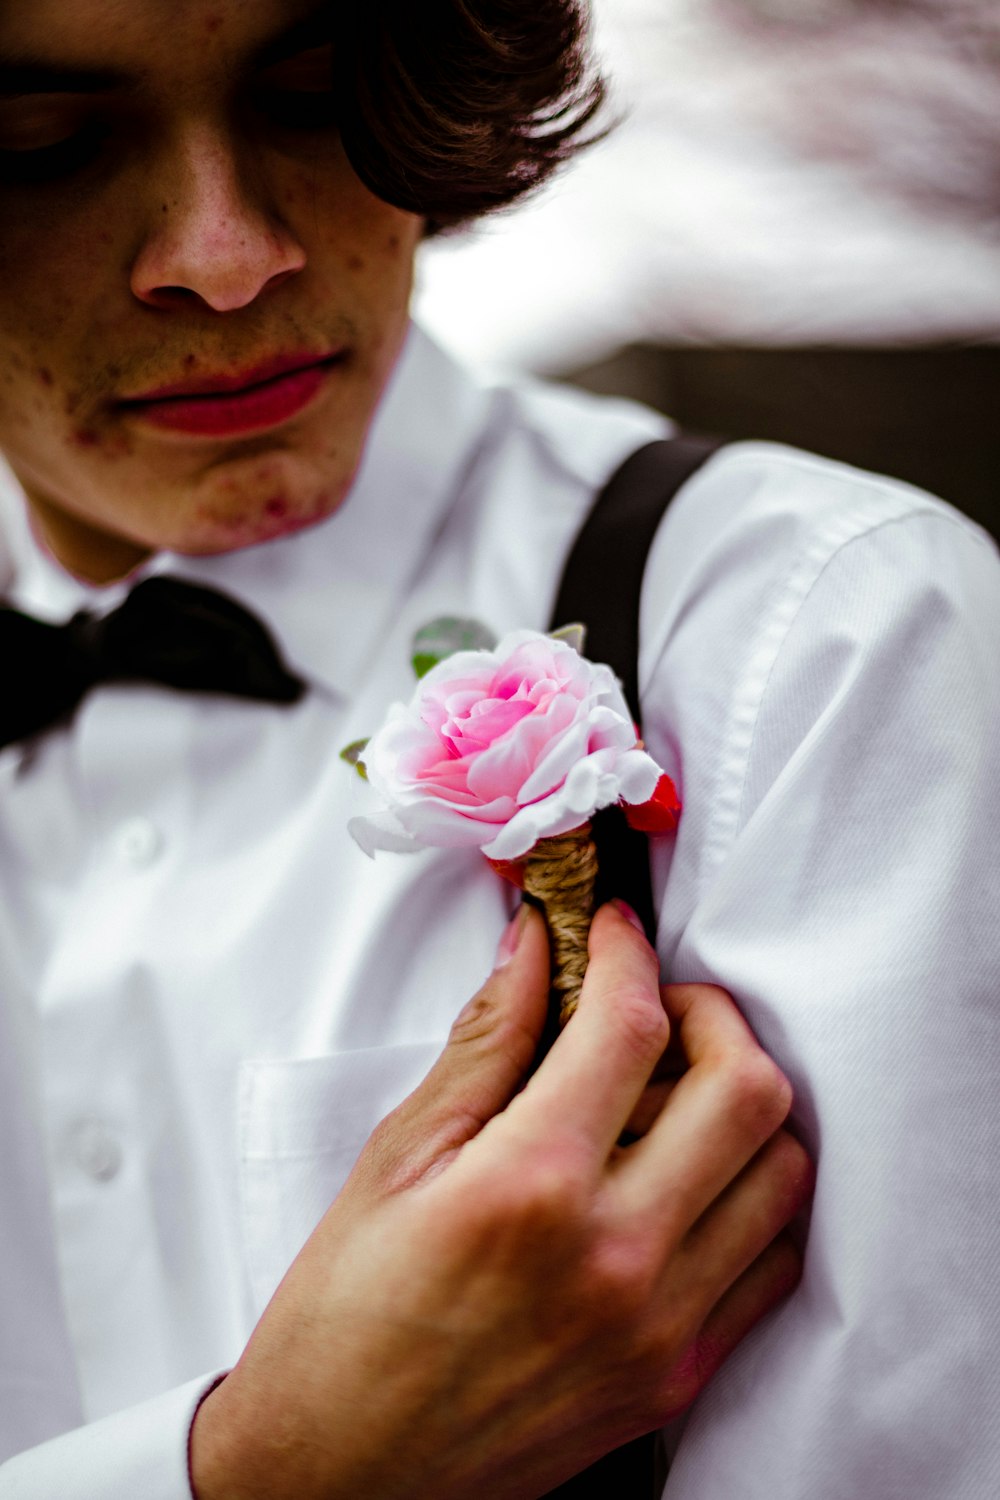 man in white dress shirt with black bowtie holding pink rose